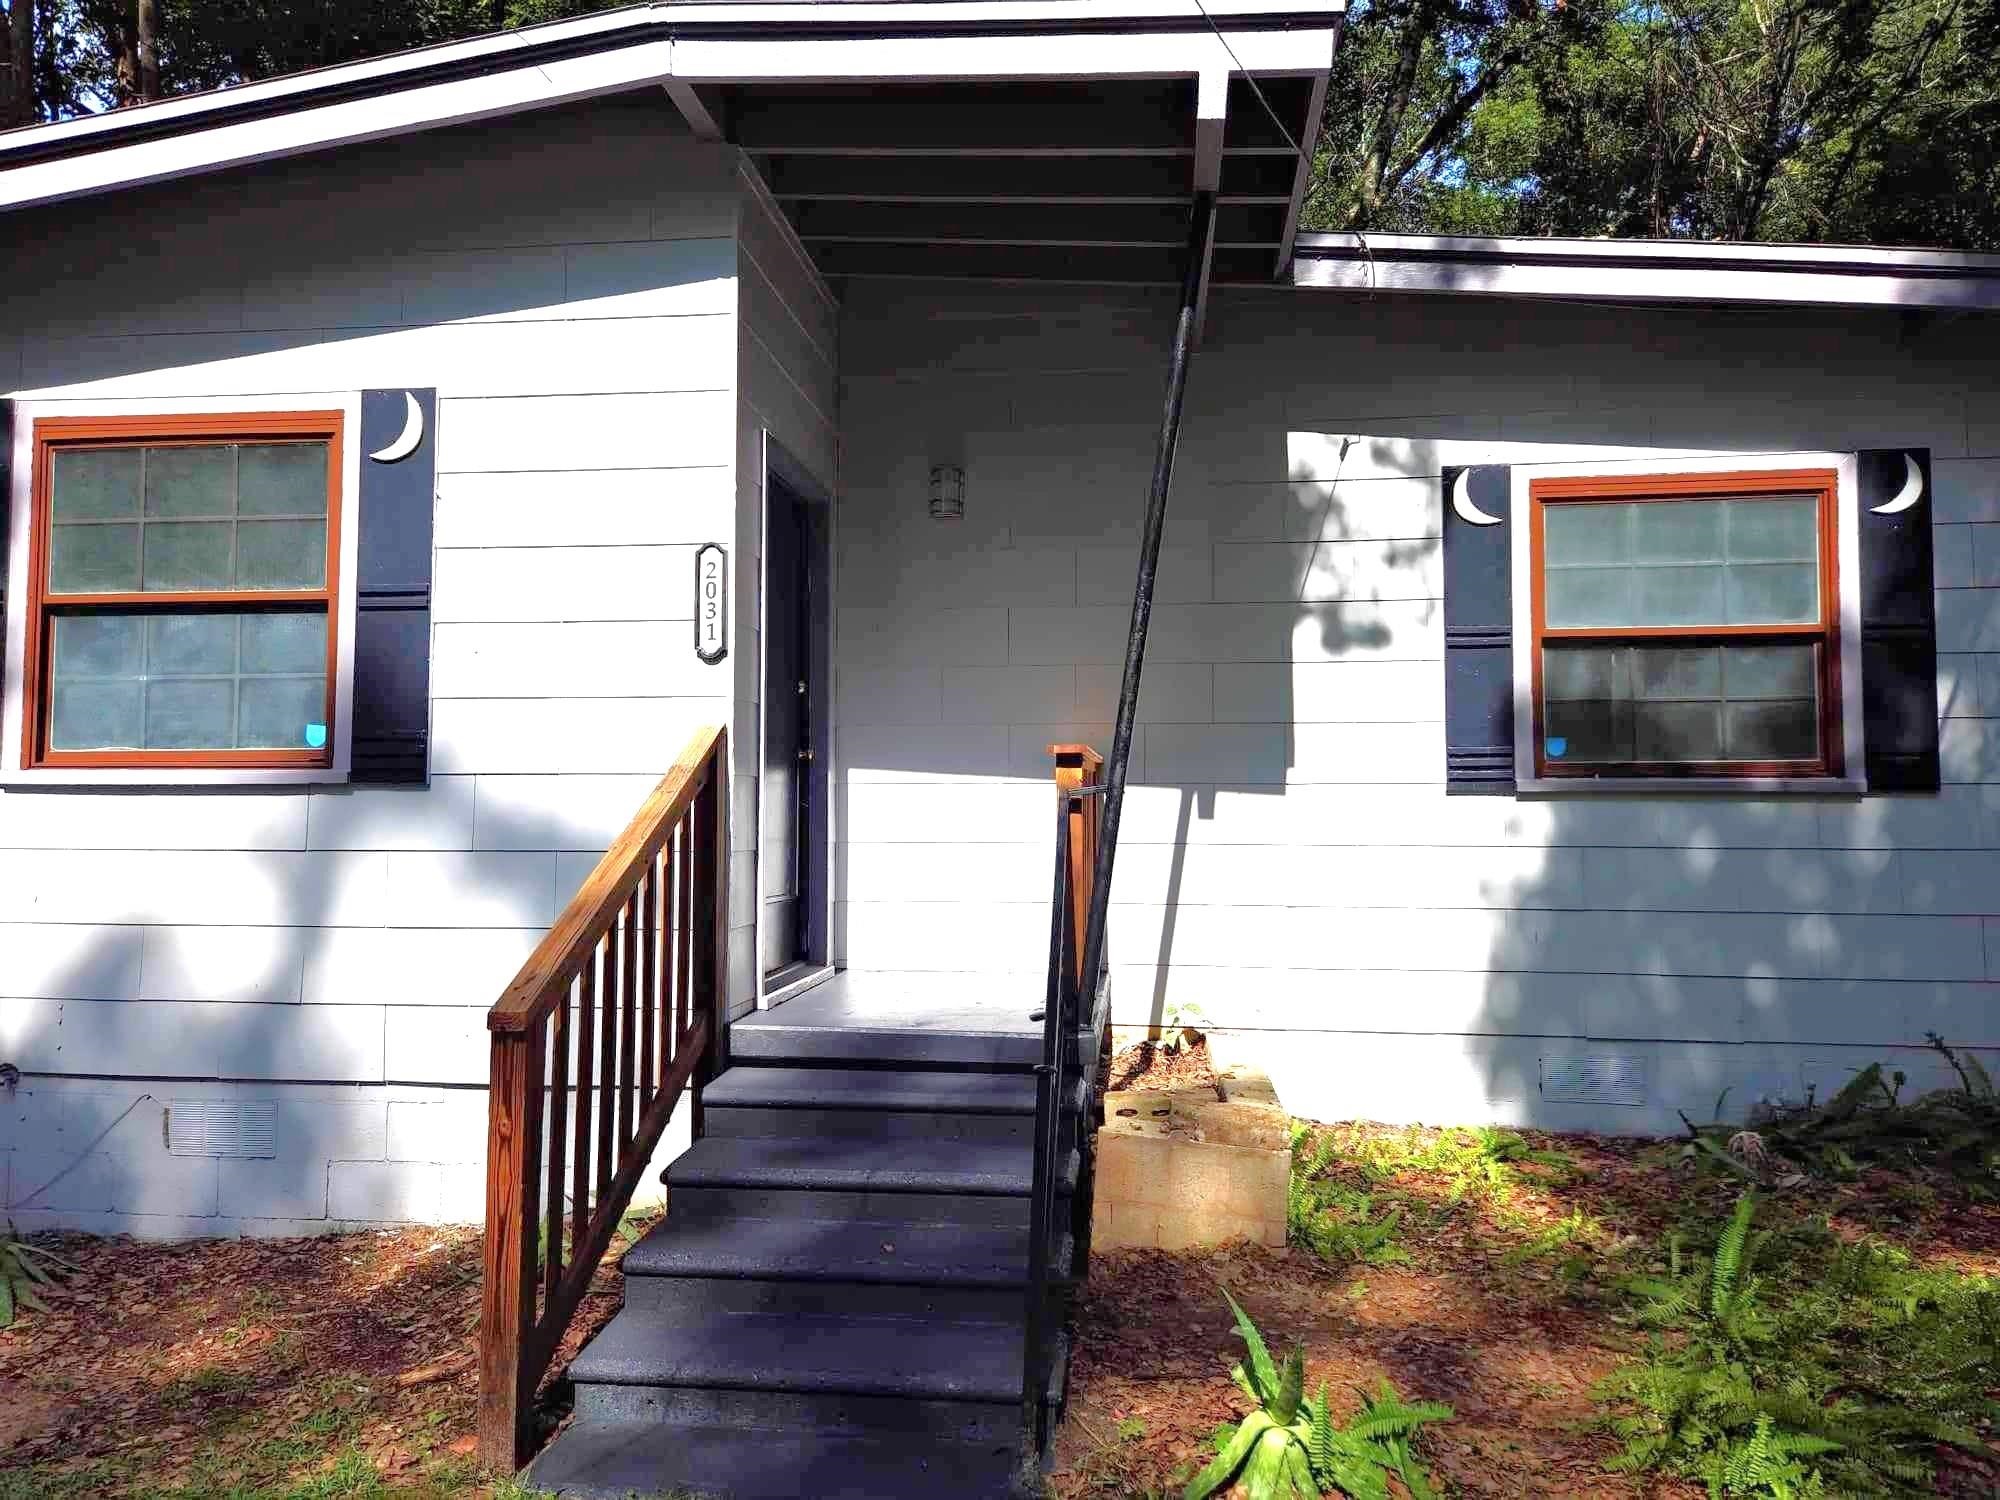 2031 Holmes Street,TALLAHASSEE,Florida 32310,2 Bedrooms Bedrooms,1 BathroomBathrooms,Detached single family,2031 Holmes Street,370090